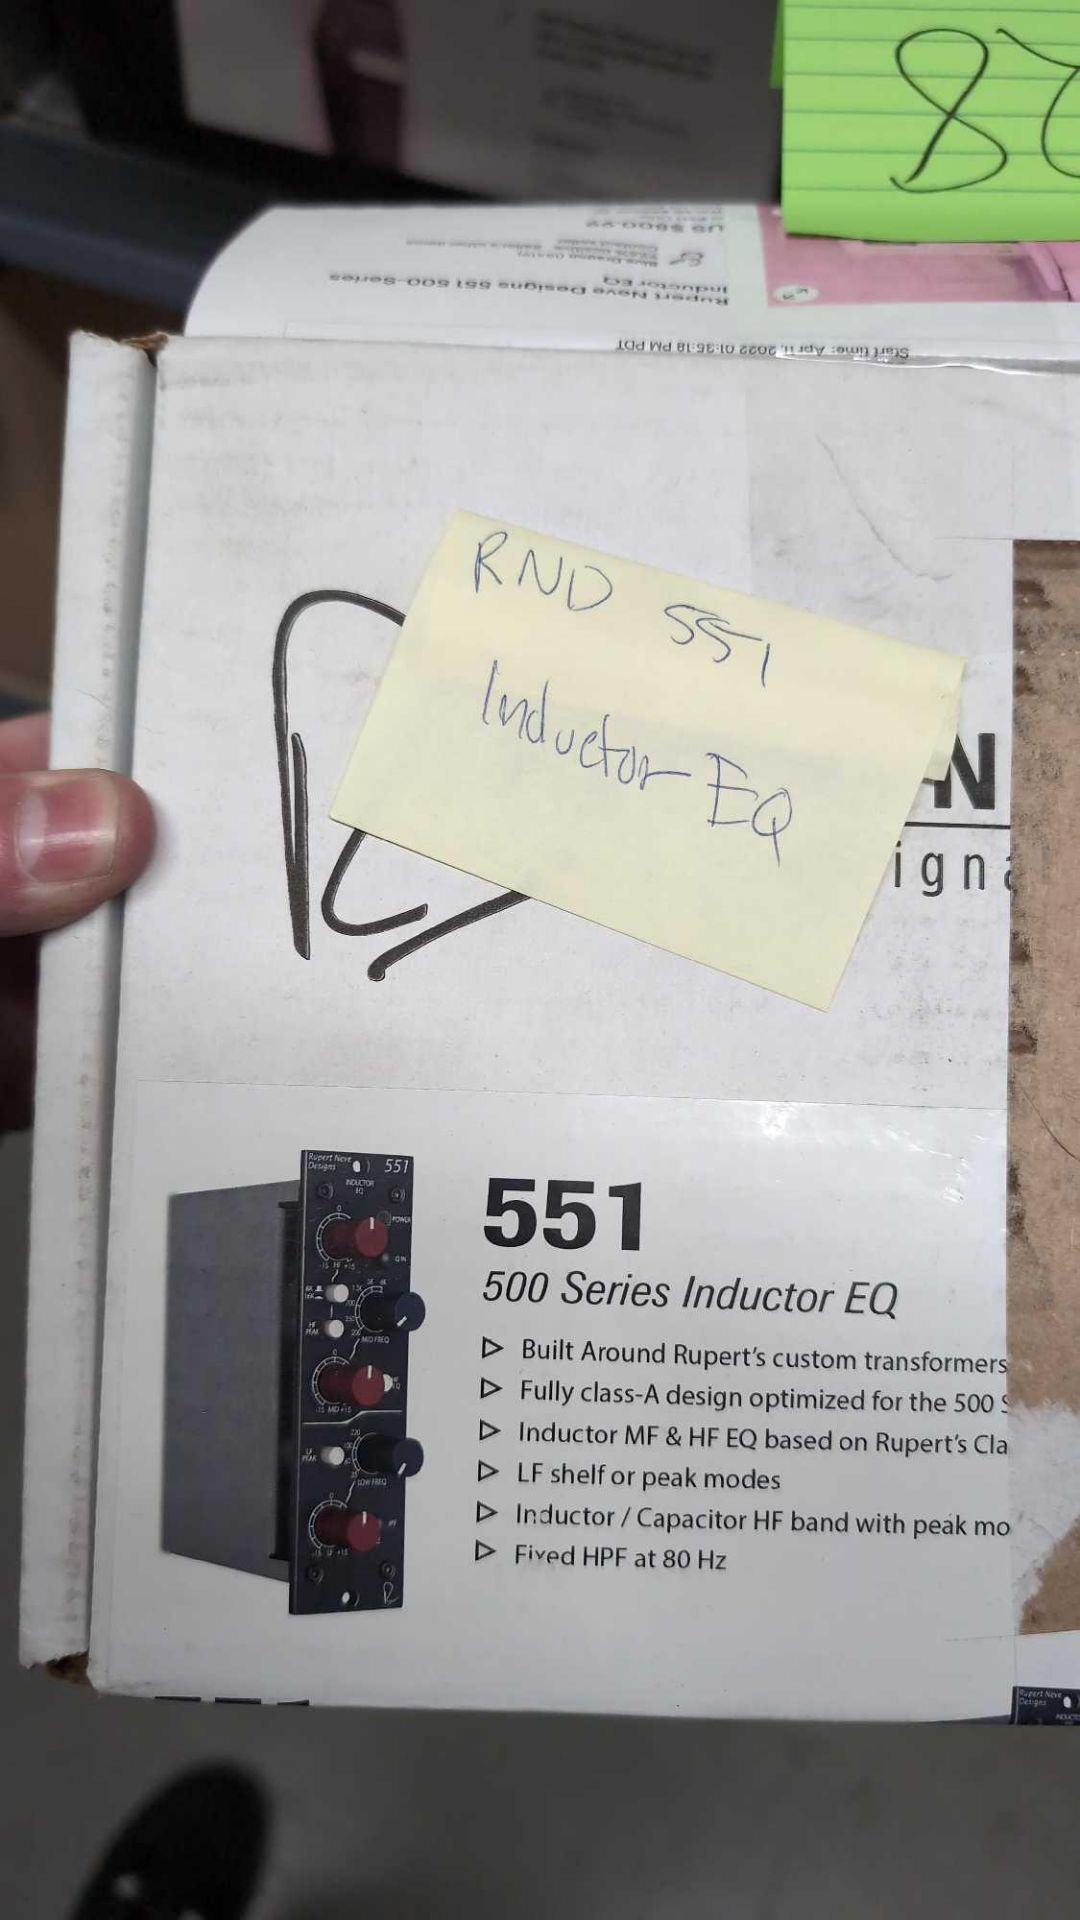 Rupert neve designs 551 500 series inductor EQ - Image 2 of 2